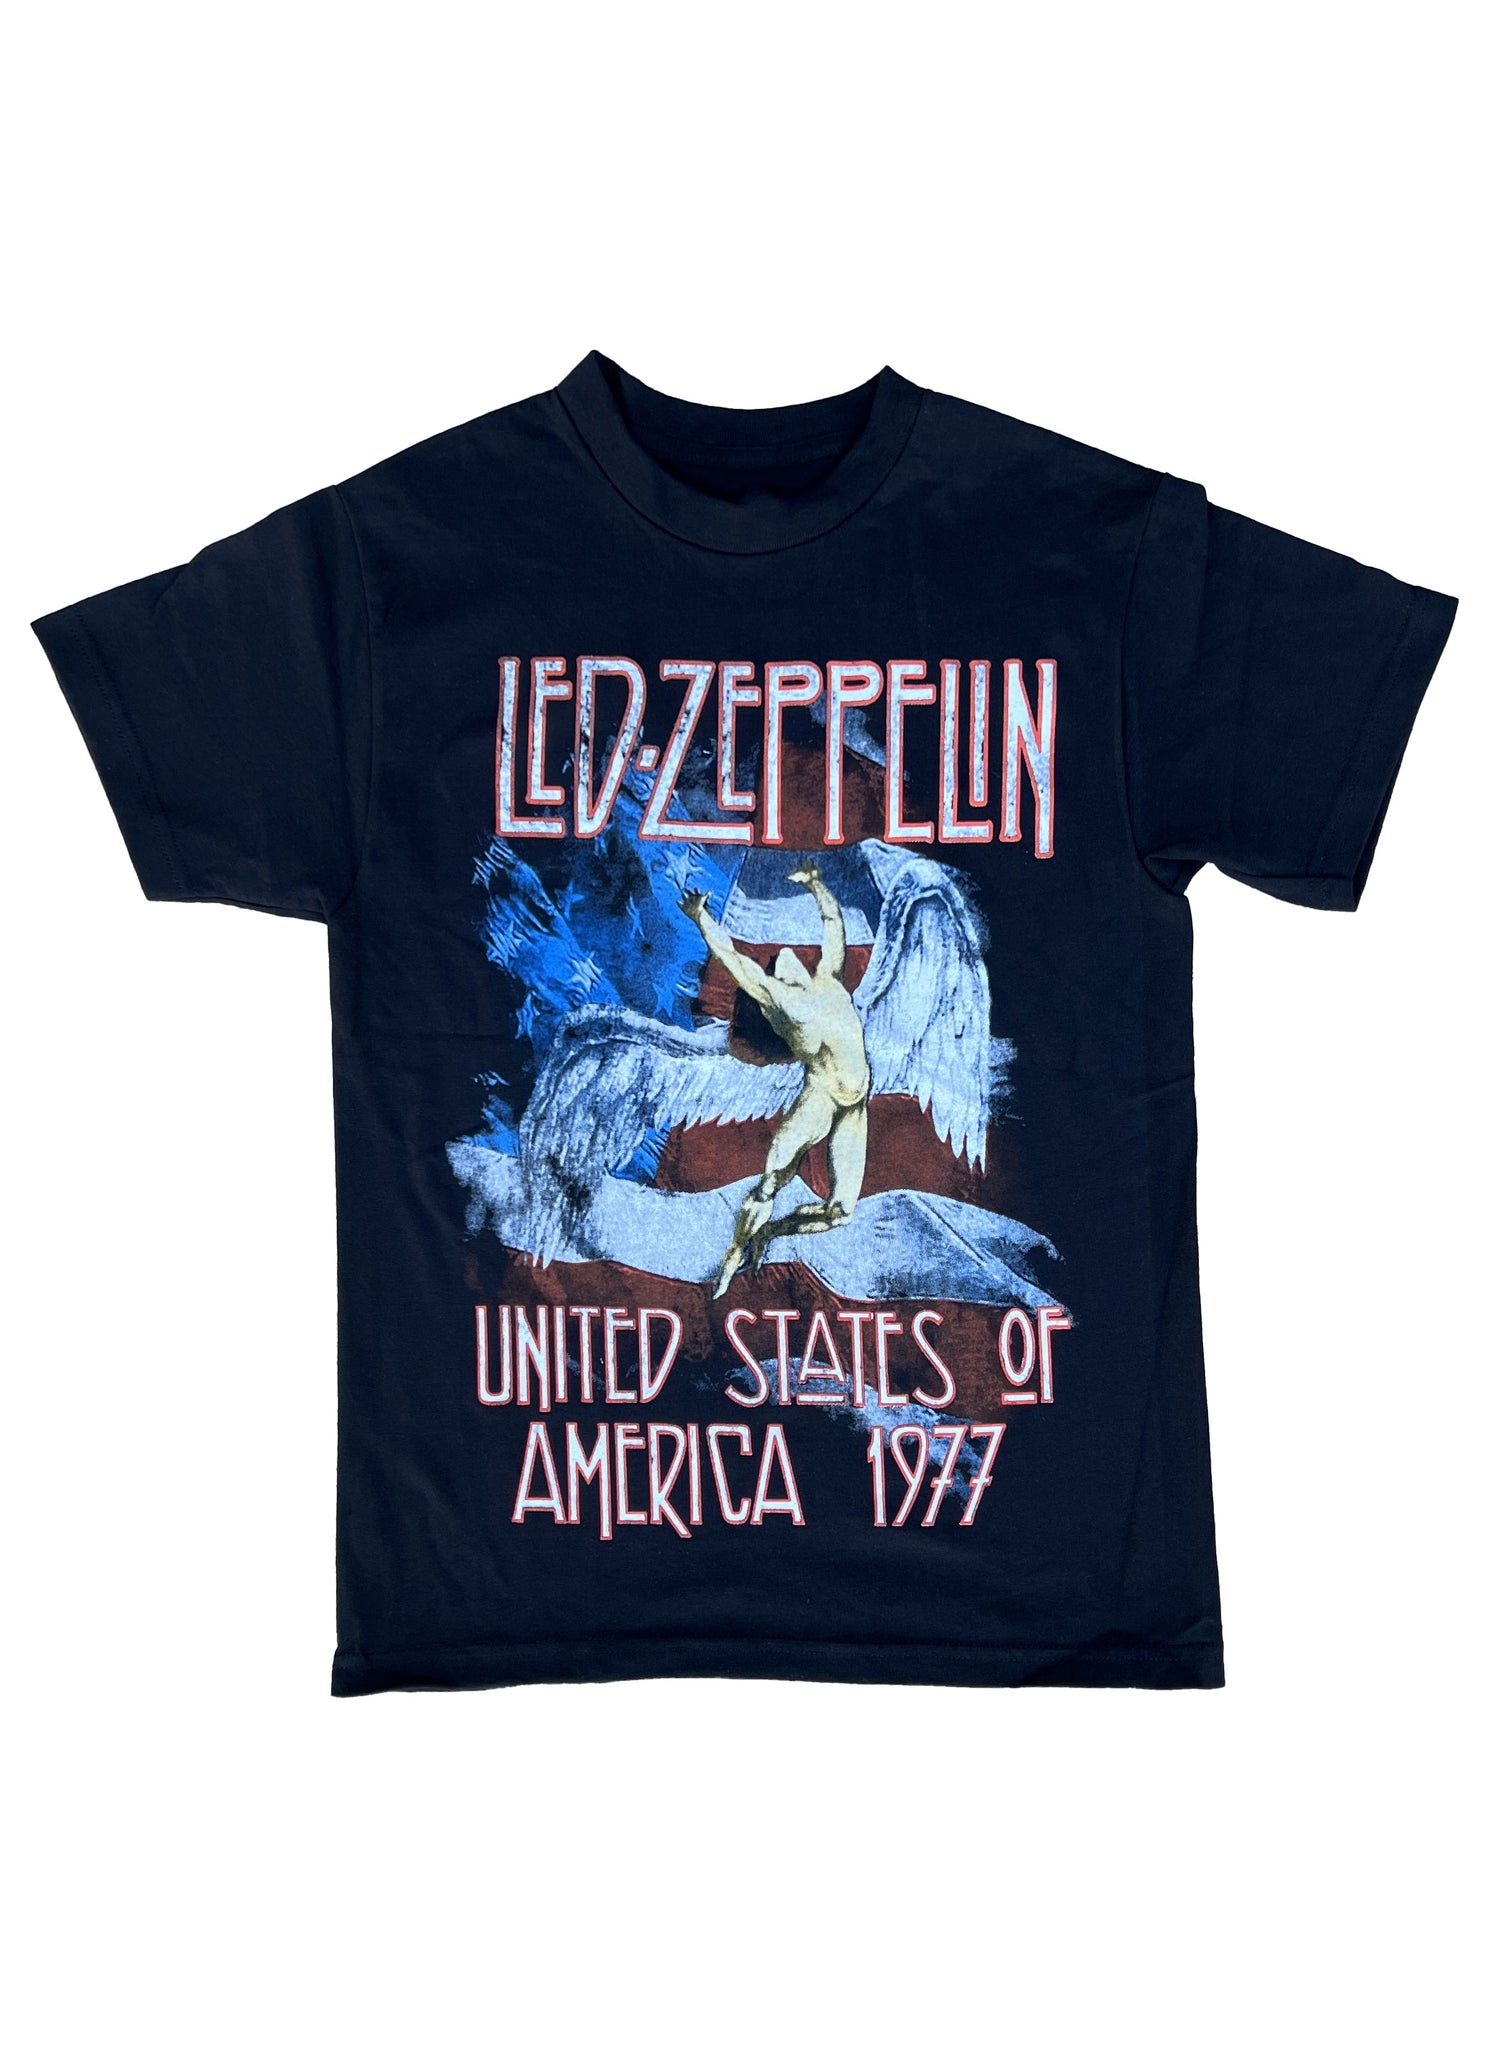 Led Zeppelin USA 1977 Graphic Tee